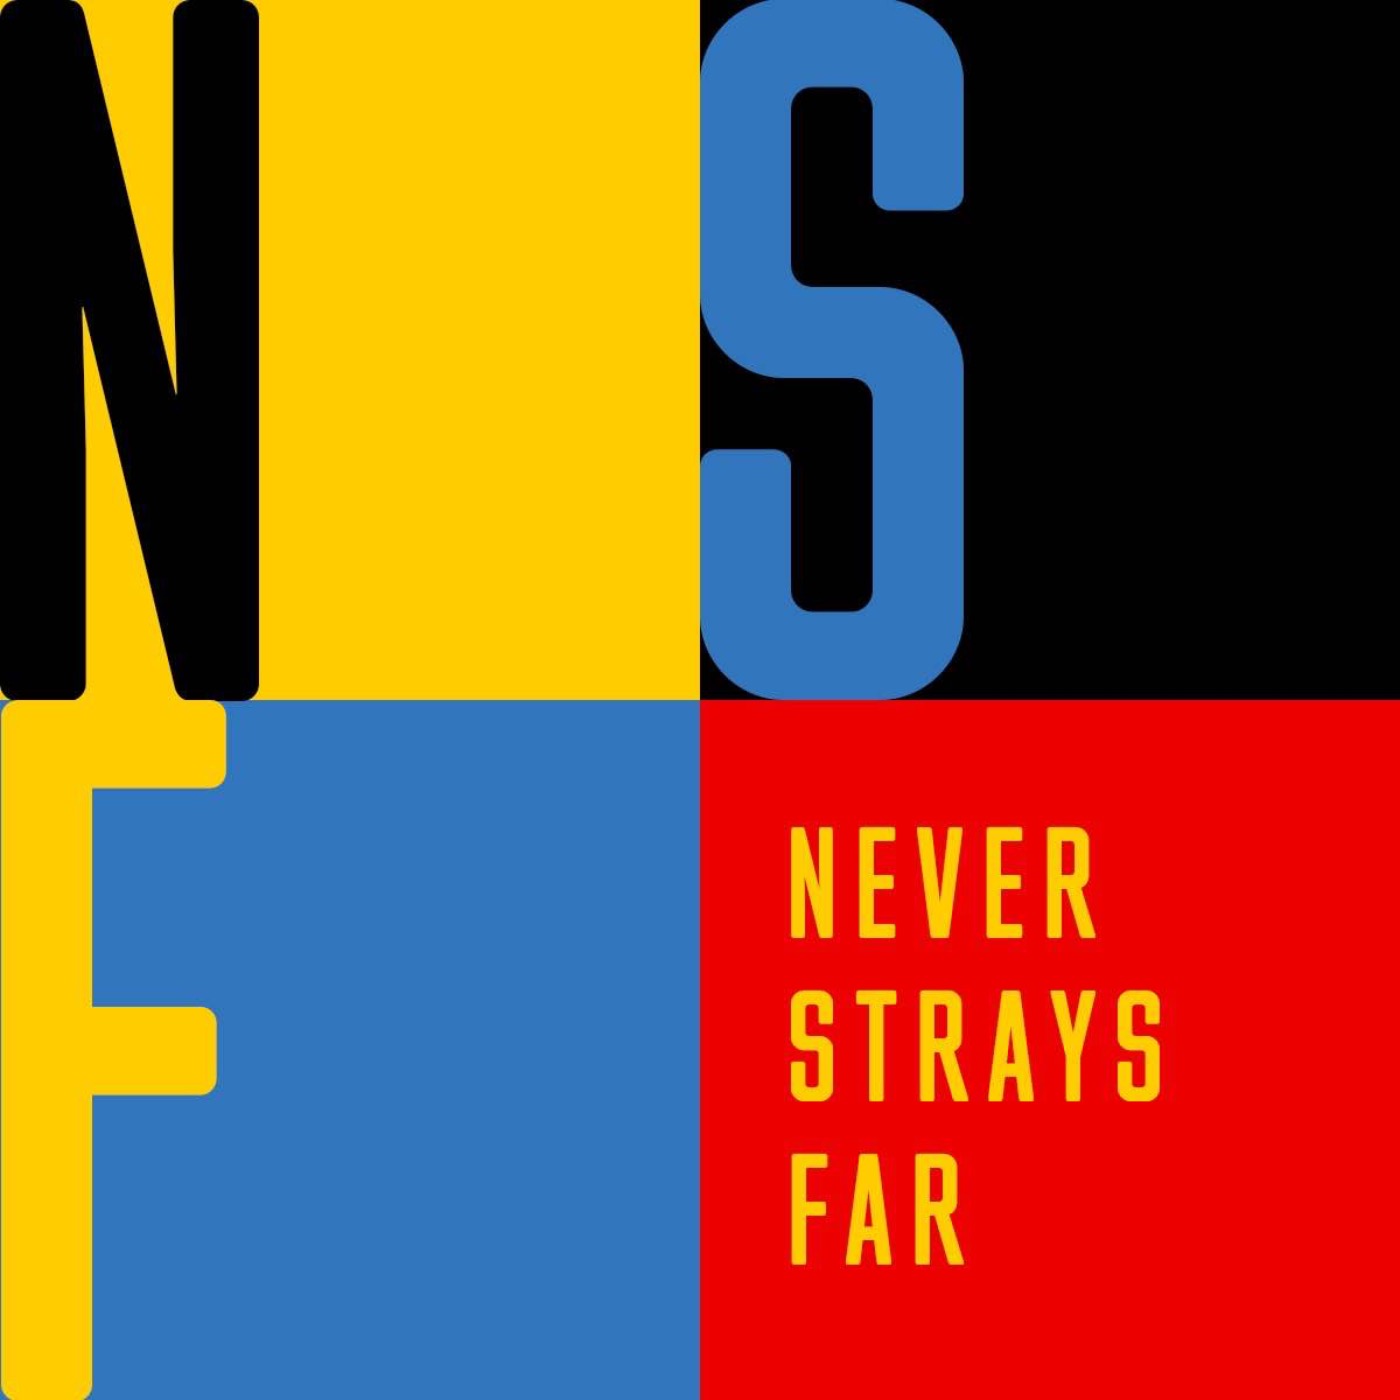 NEVER STRAYS FAR: AFTER THE QUEEN